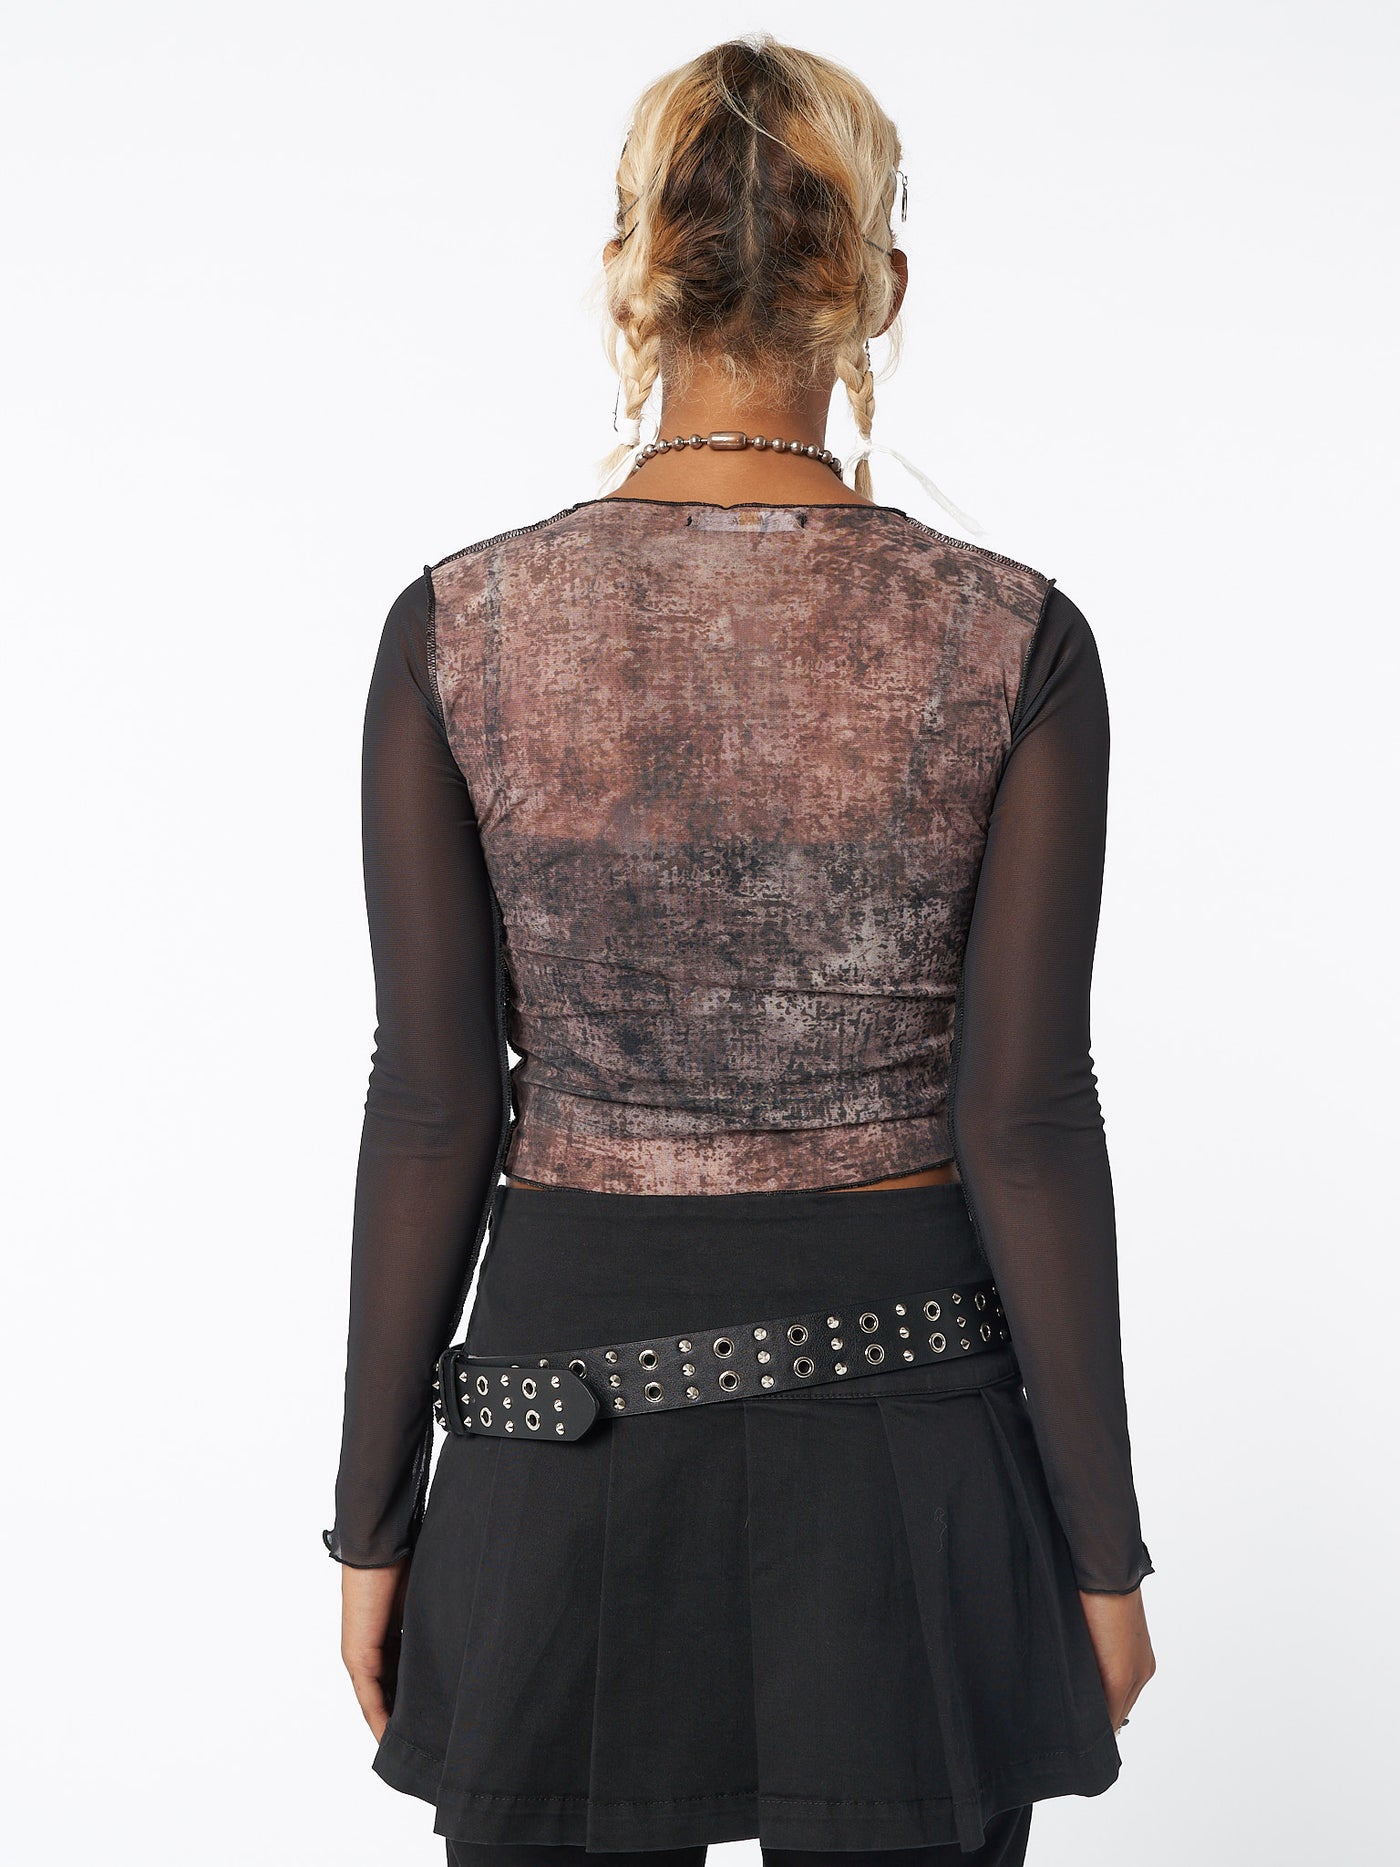 Mesh crop top and skull distressed front print with contrast sleeves in black